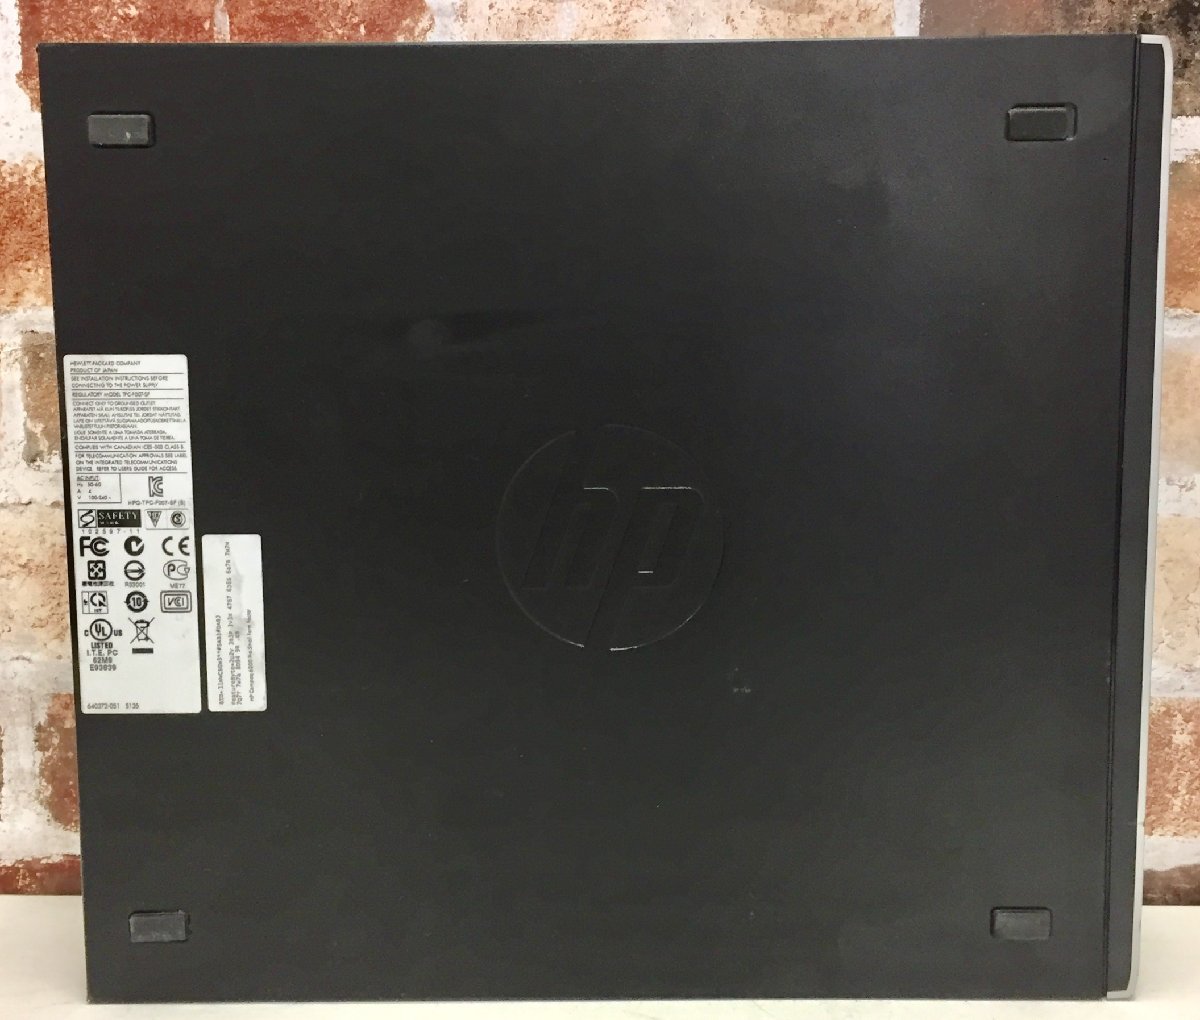 JD1704Y HP Compaq 6200Pro CPU:Intel(R) Core(TM) i3-2120 CPU 3.30GHz  HDD:250GB メモリ:8GB シリアル:Windows Pro product details Proxy bidding and  ordering service for auctions and shopping within Japan and the United